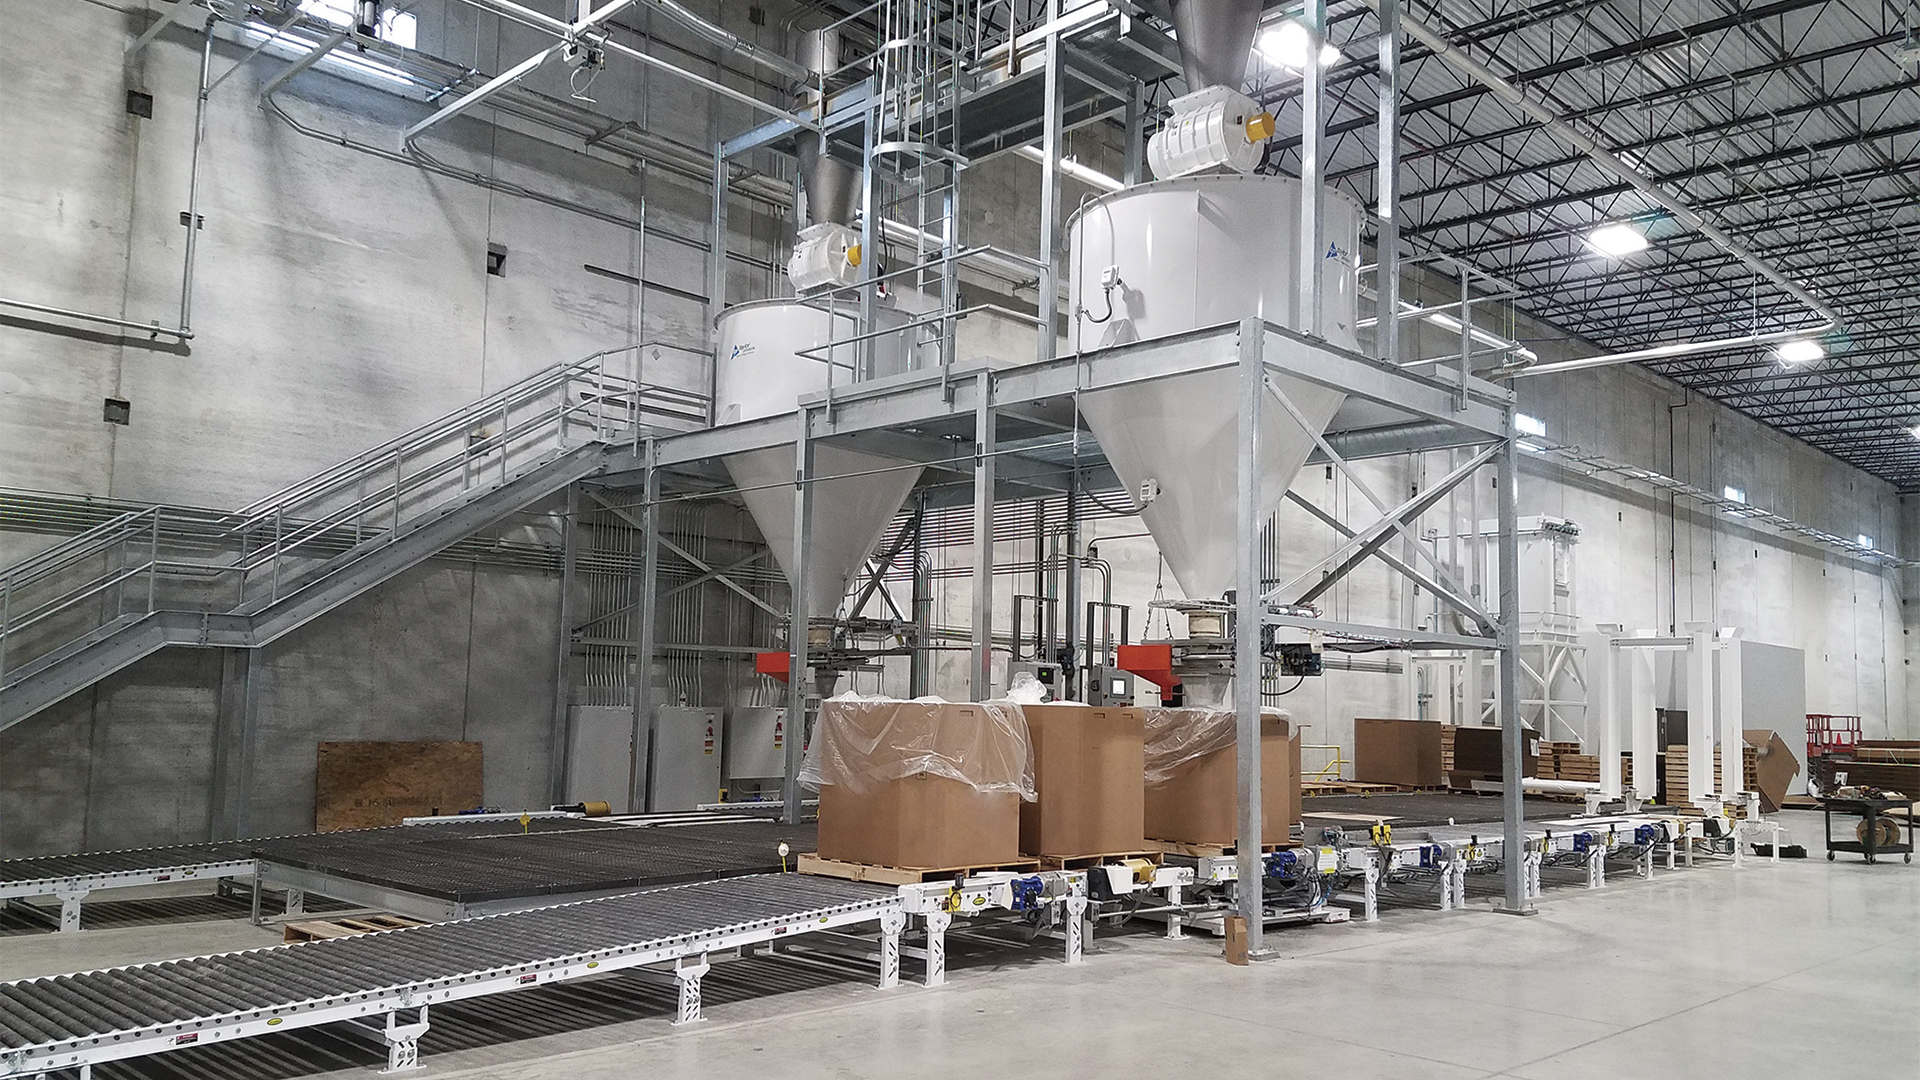 When Choosing an Industrial Conveyor, Several Criteria Must be Considered